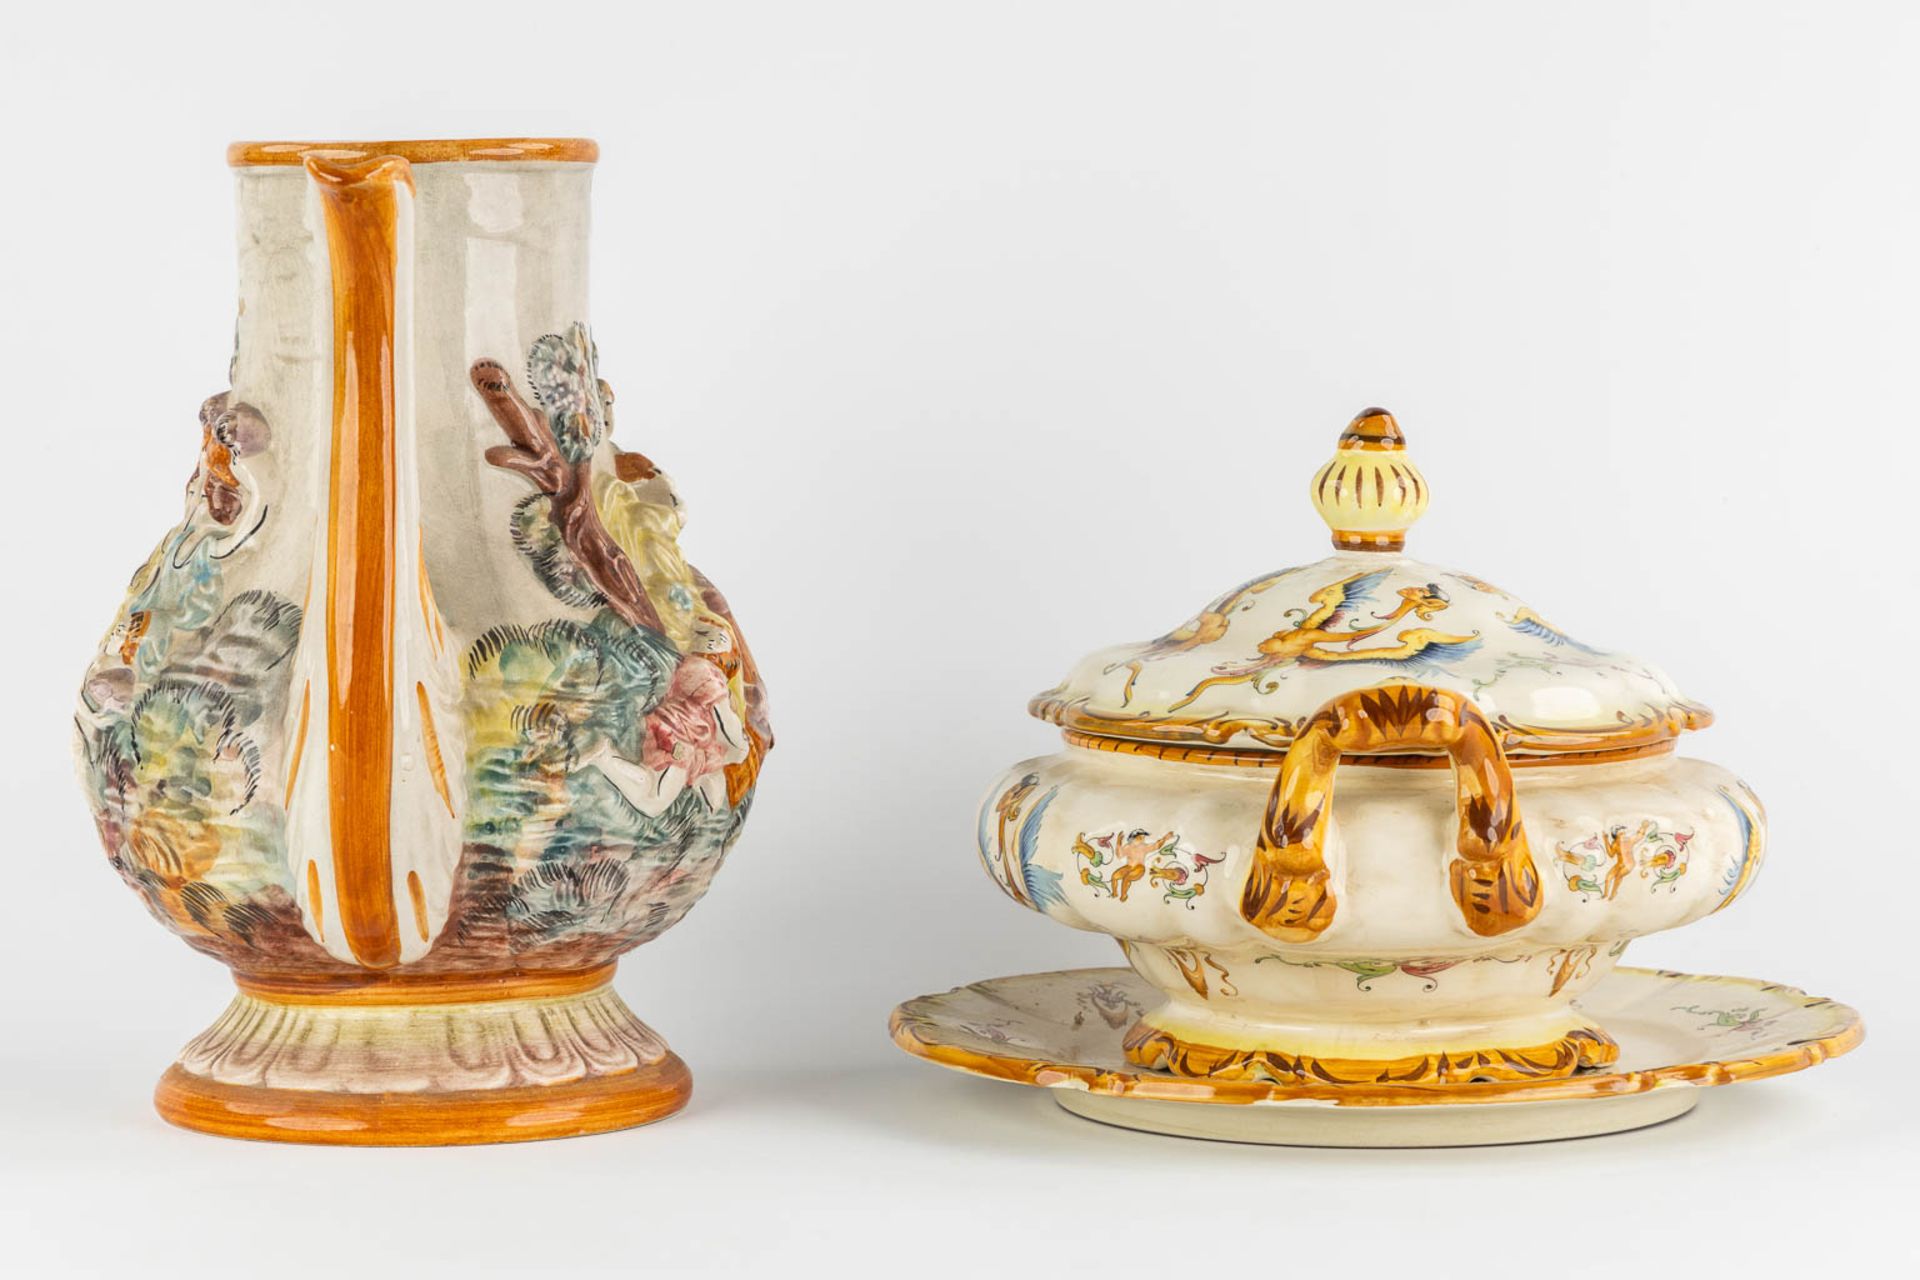 Capodimonte, 5 large pitchers, vases and urns. Glazed faience. (L:23 x W:31 x H:50 cm) - Image 18 of 31